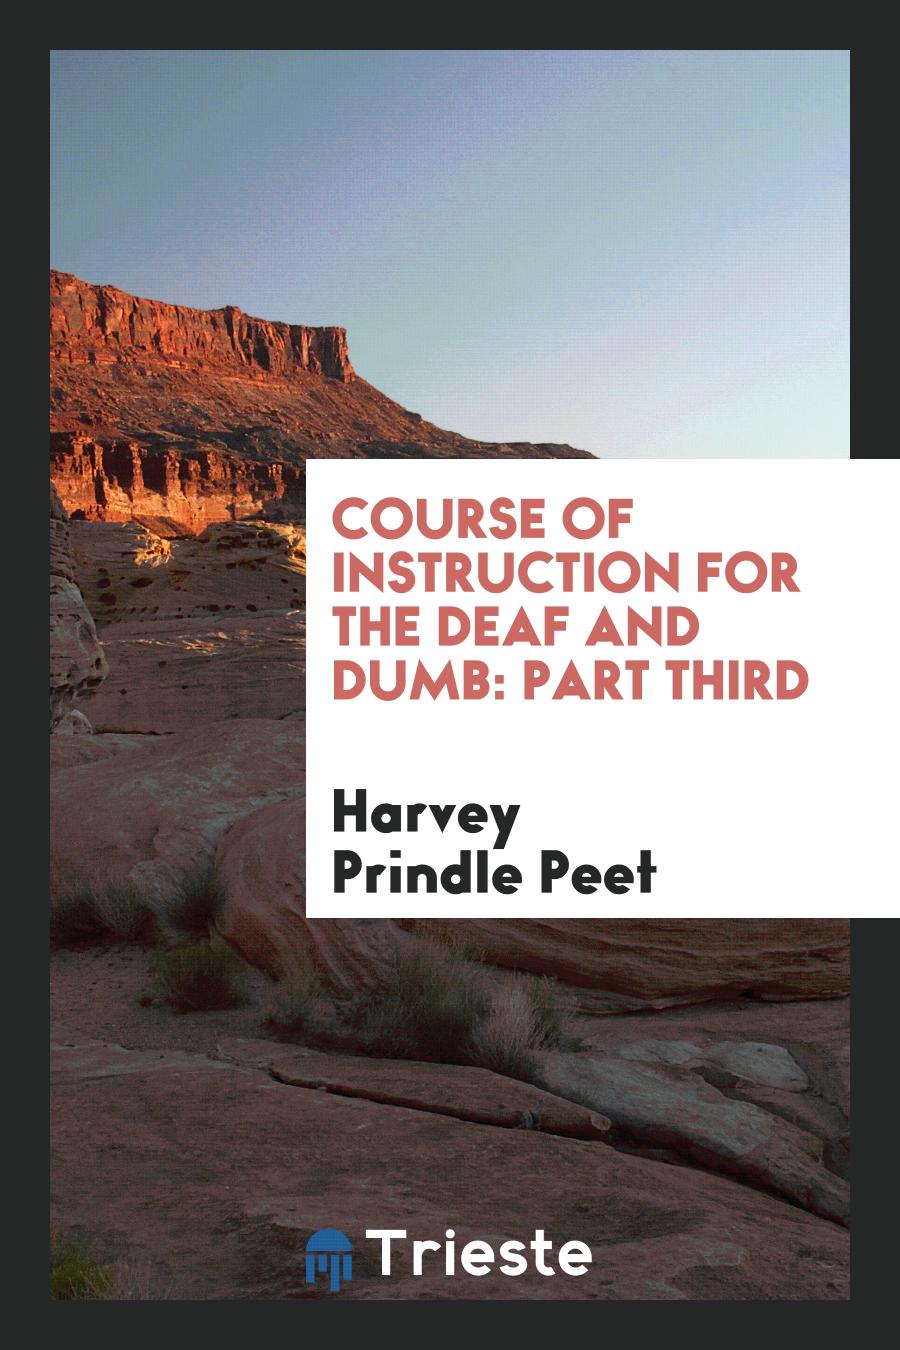 Harvey Prindle Peet - Course of Instruction for the Deaf and Dumb: Part Third